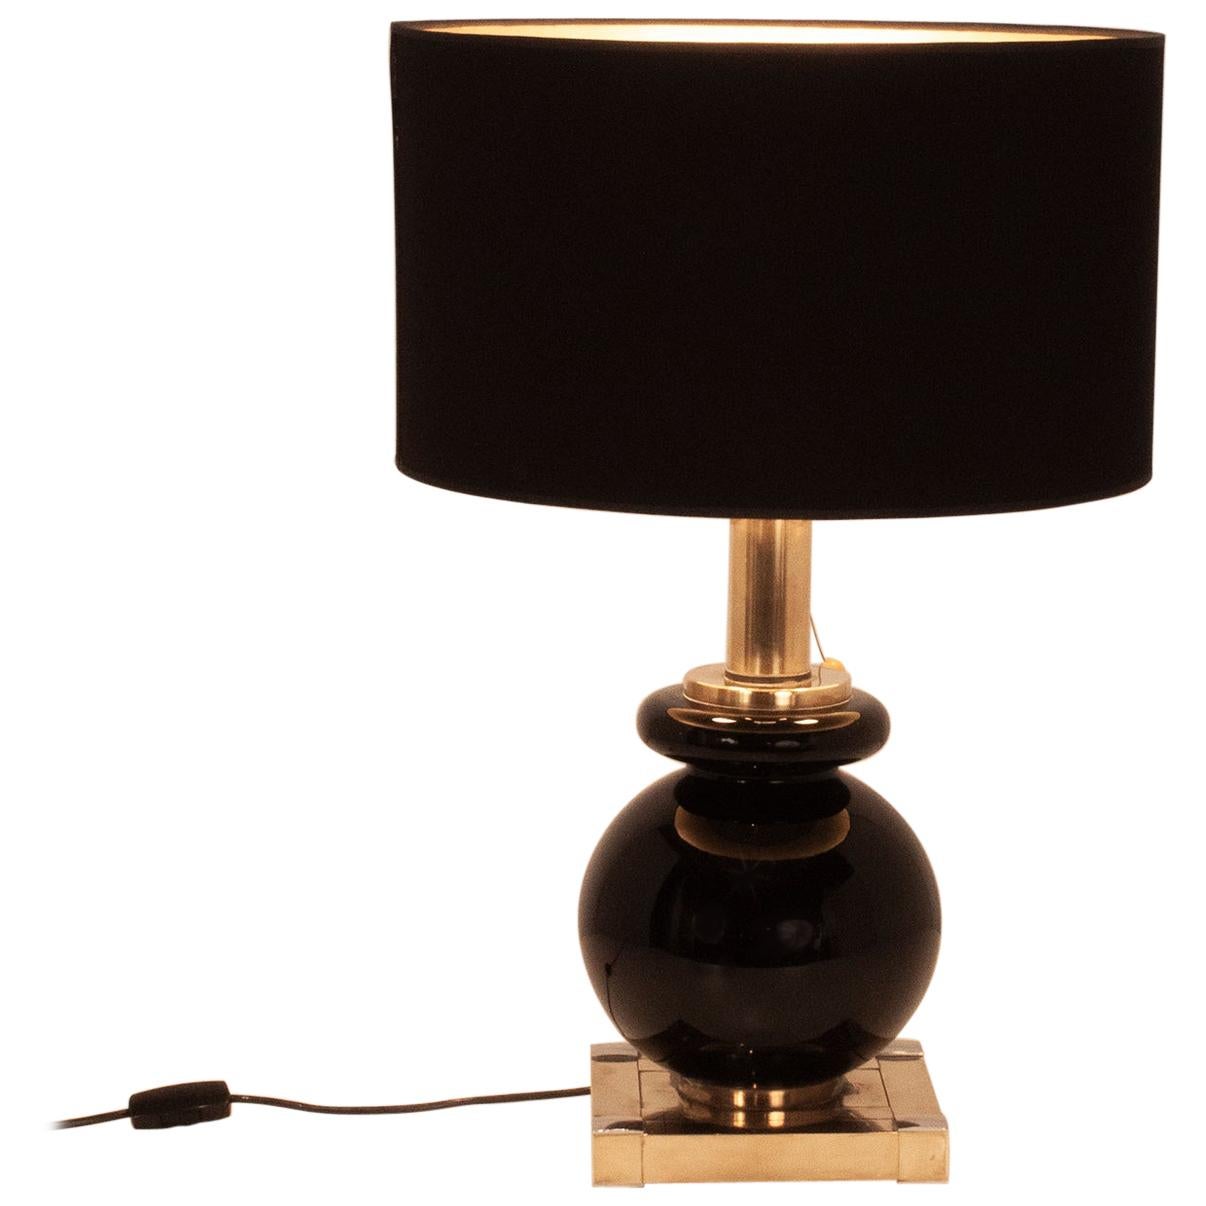 Midcentury Table Lamp Designed by Willy Rizzo, 1970s for Lumica, Spain, Brass